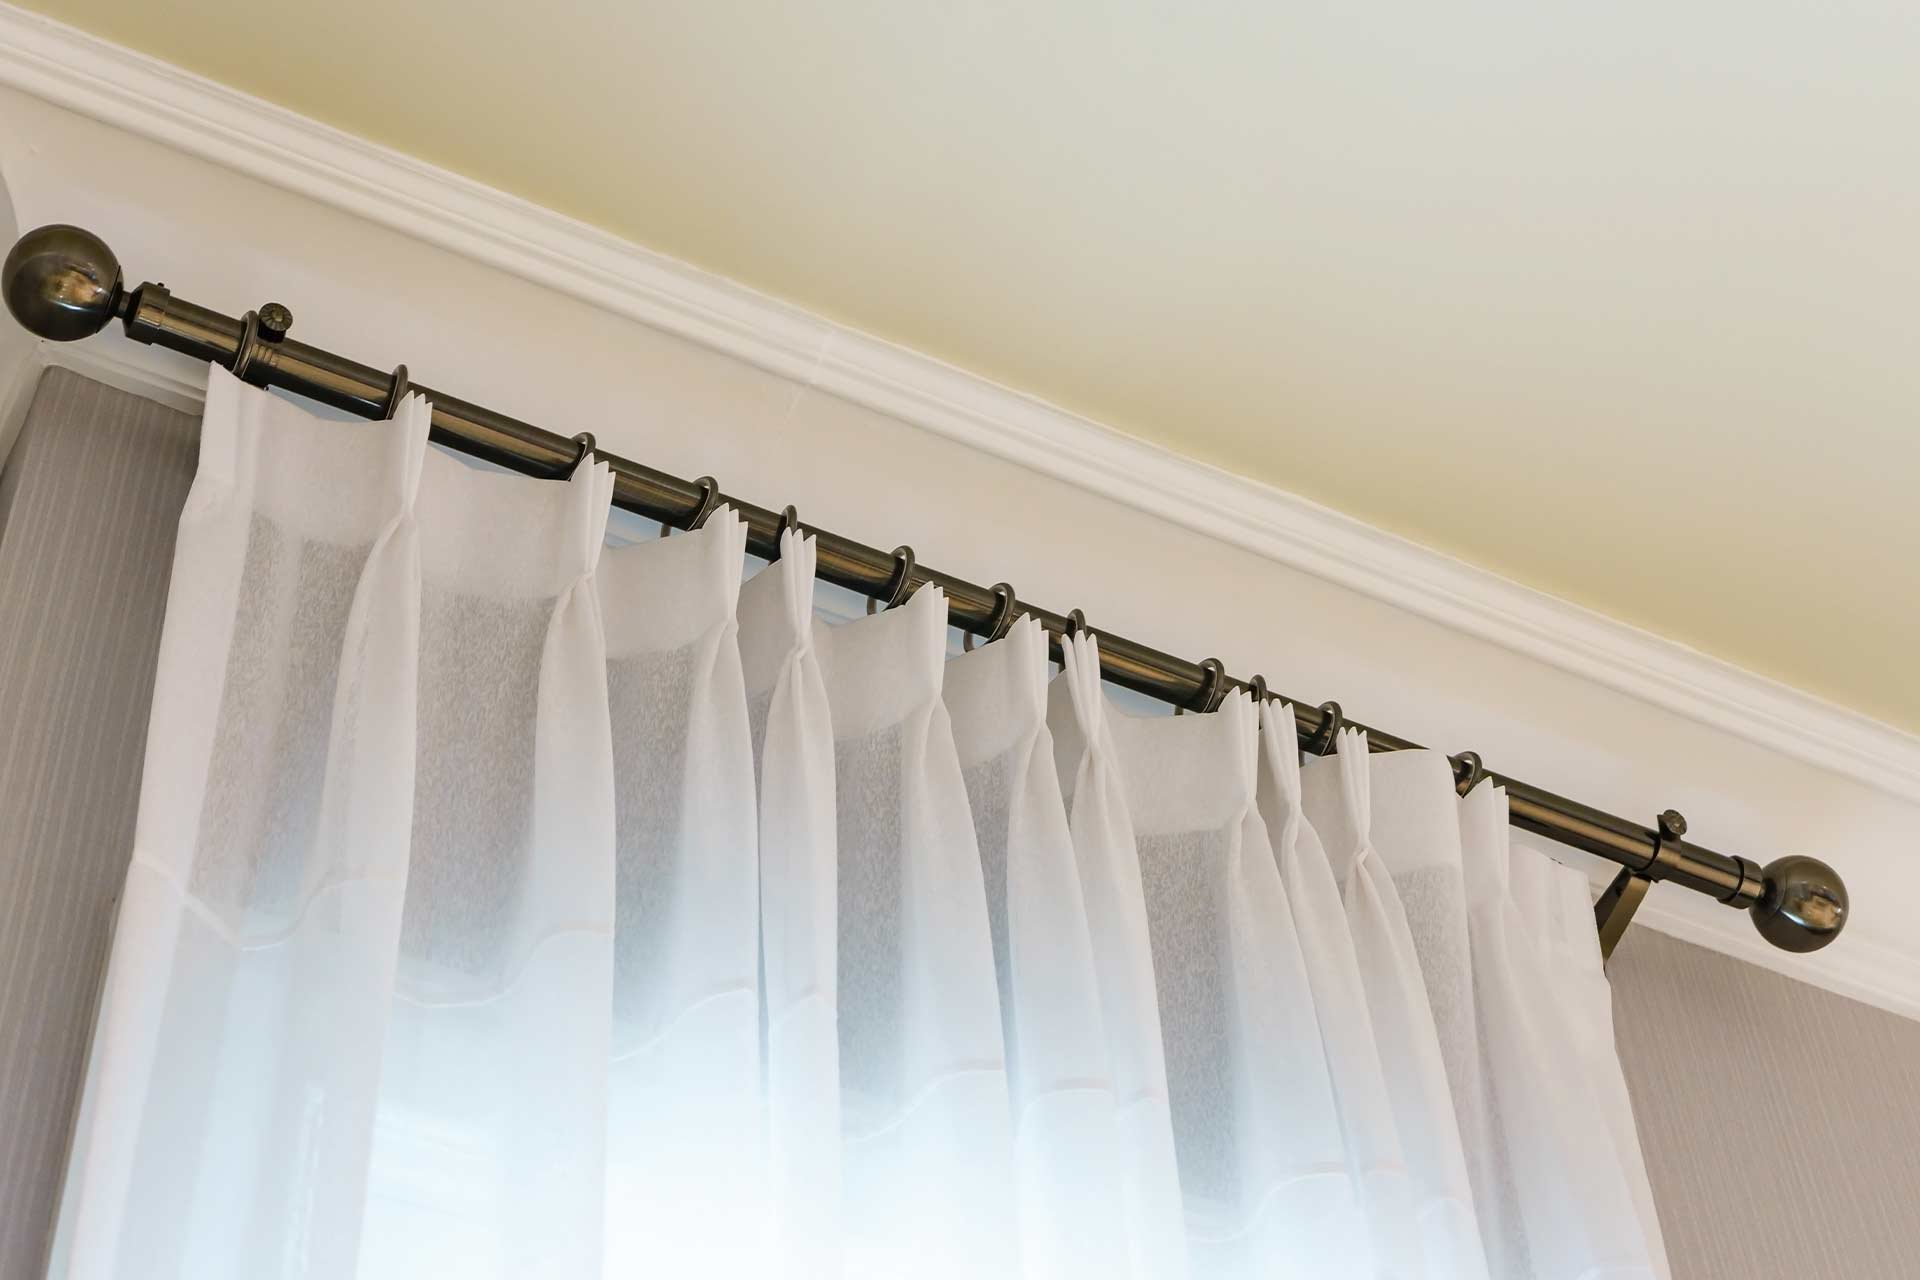 How To Attach Curtain Rods In Plaster Walls